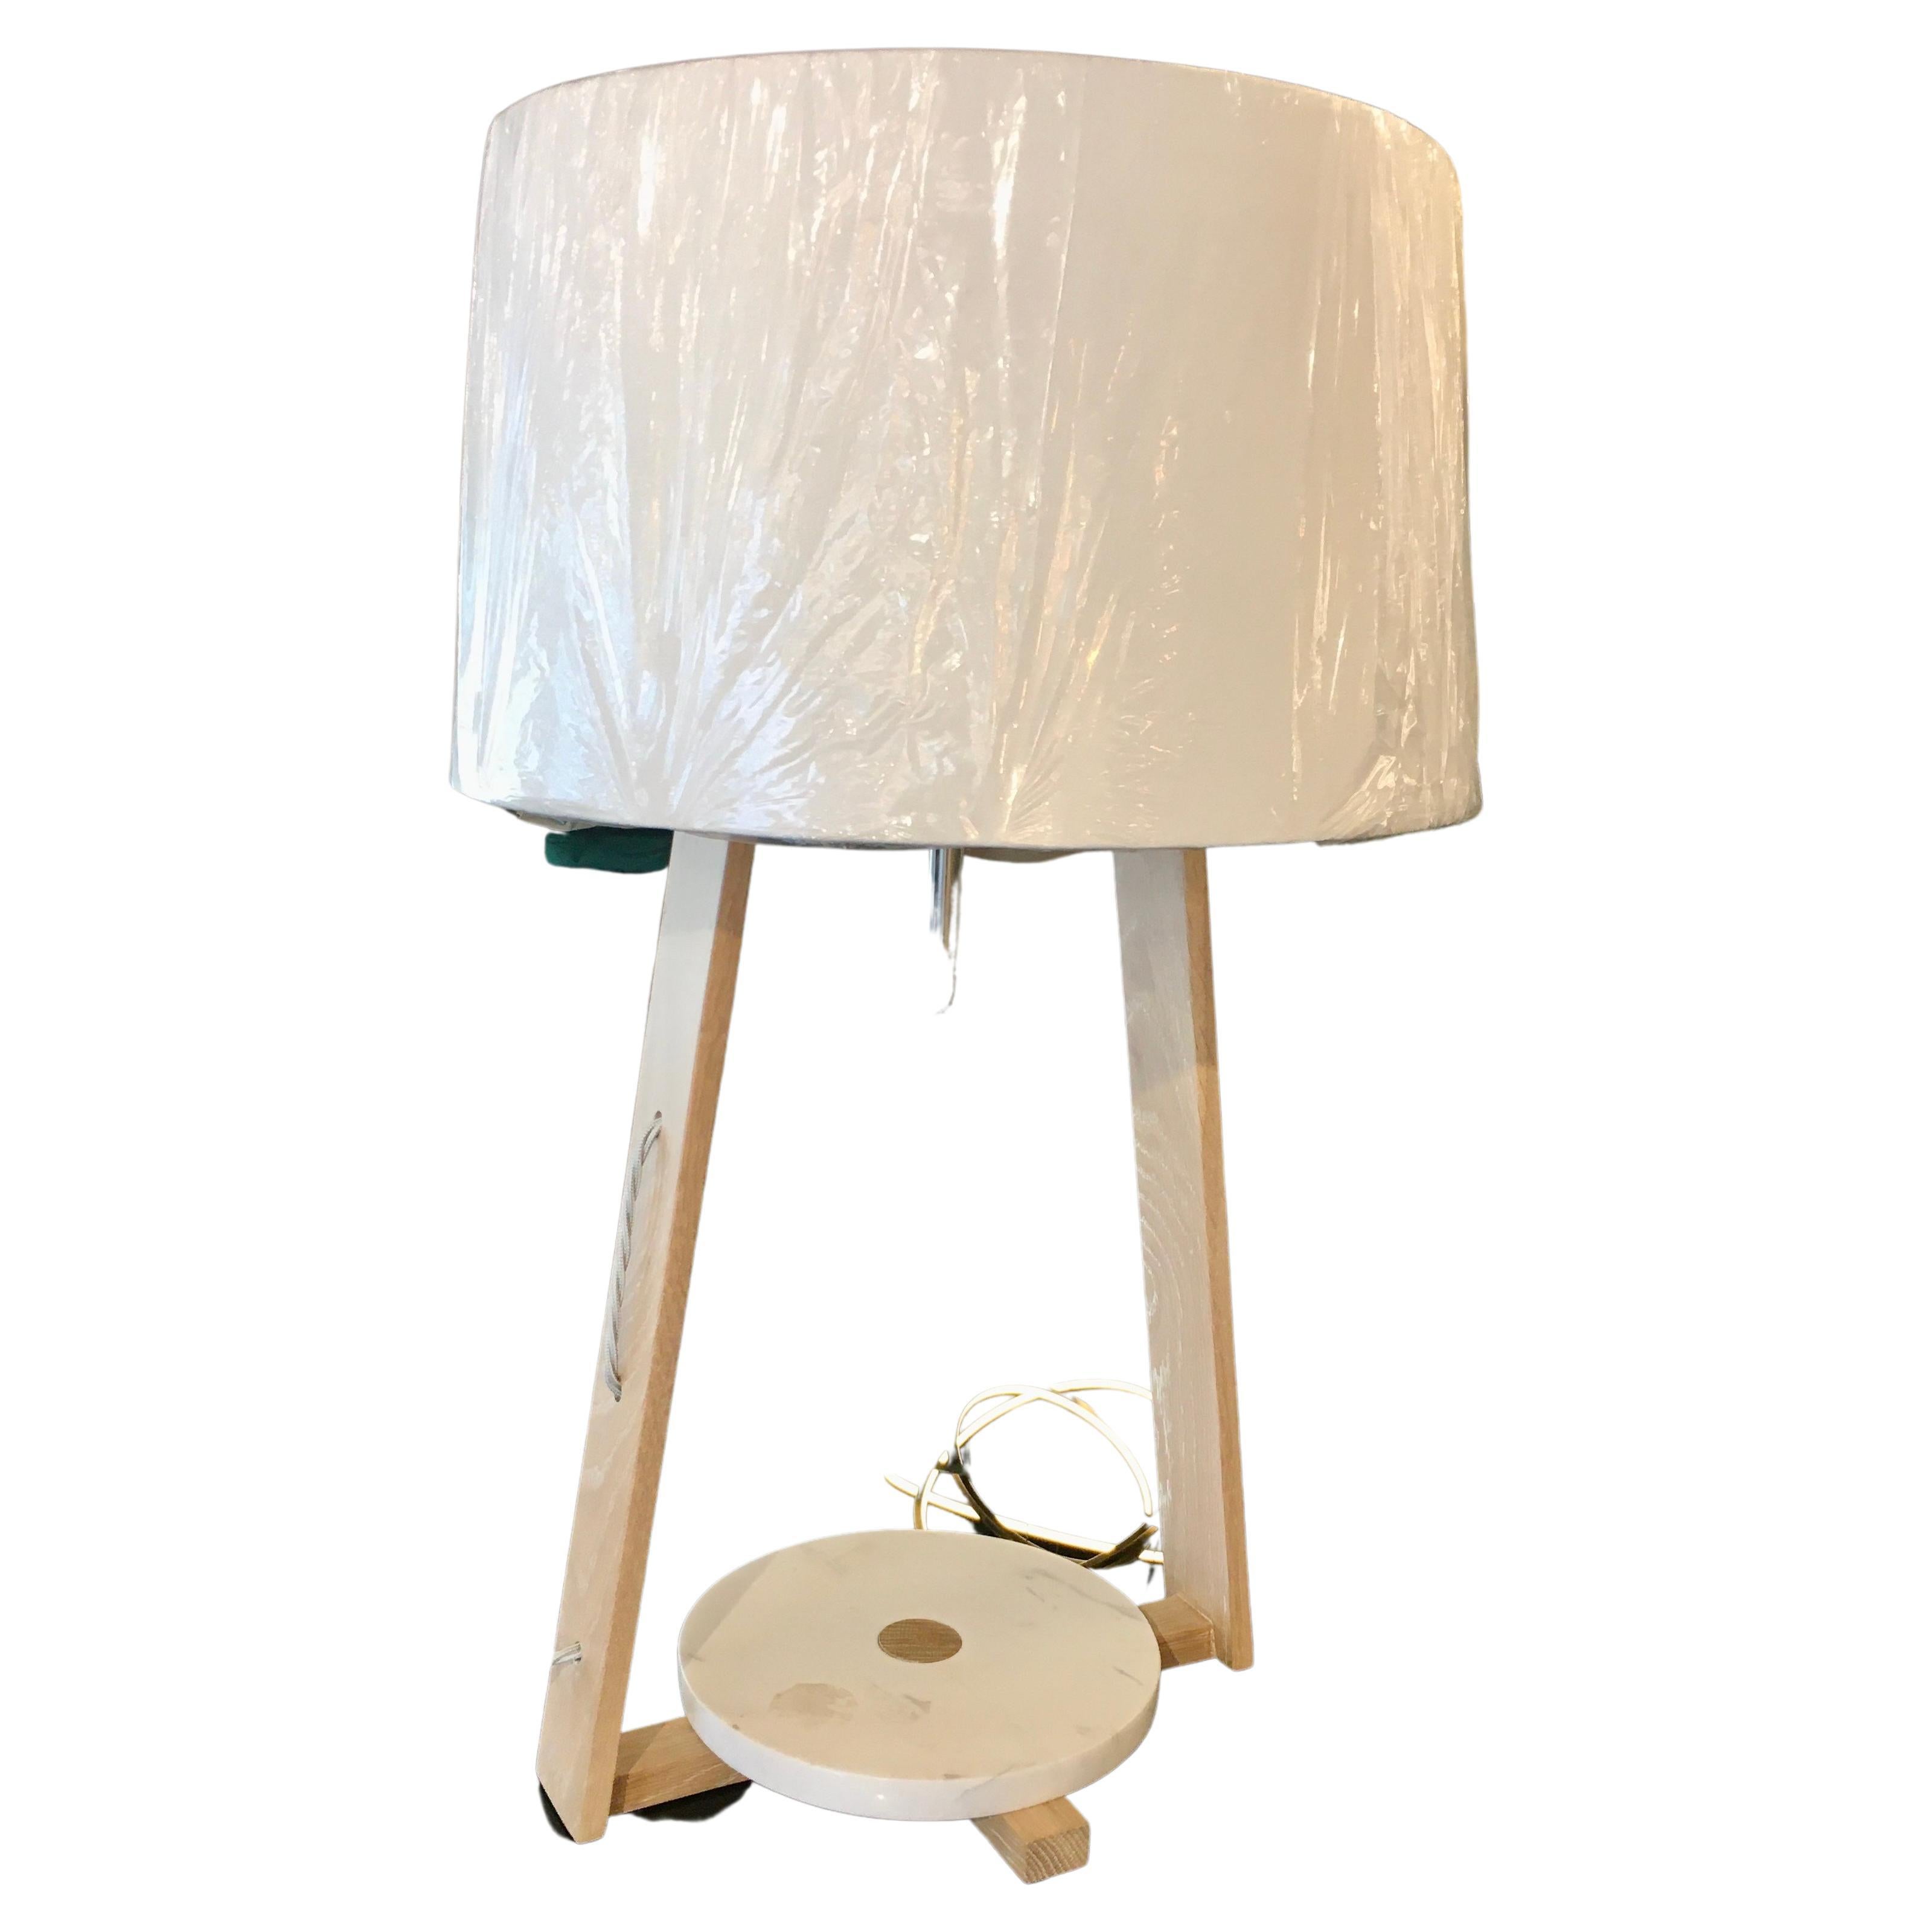 Table lamp in White Oak with a Marble base. For Sale